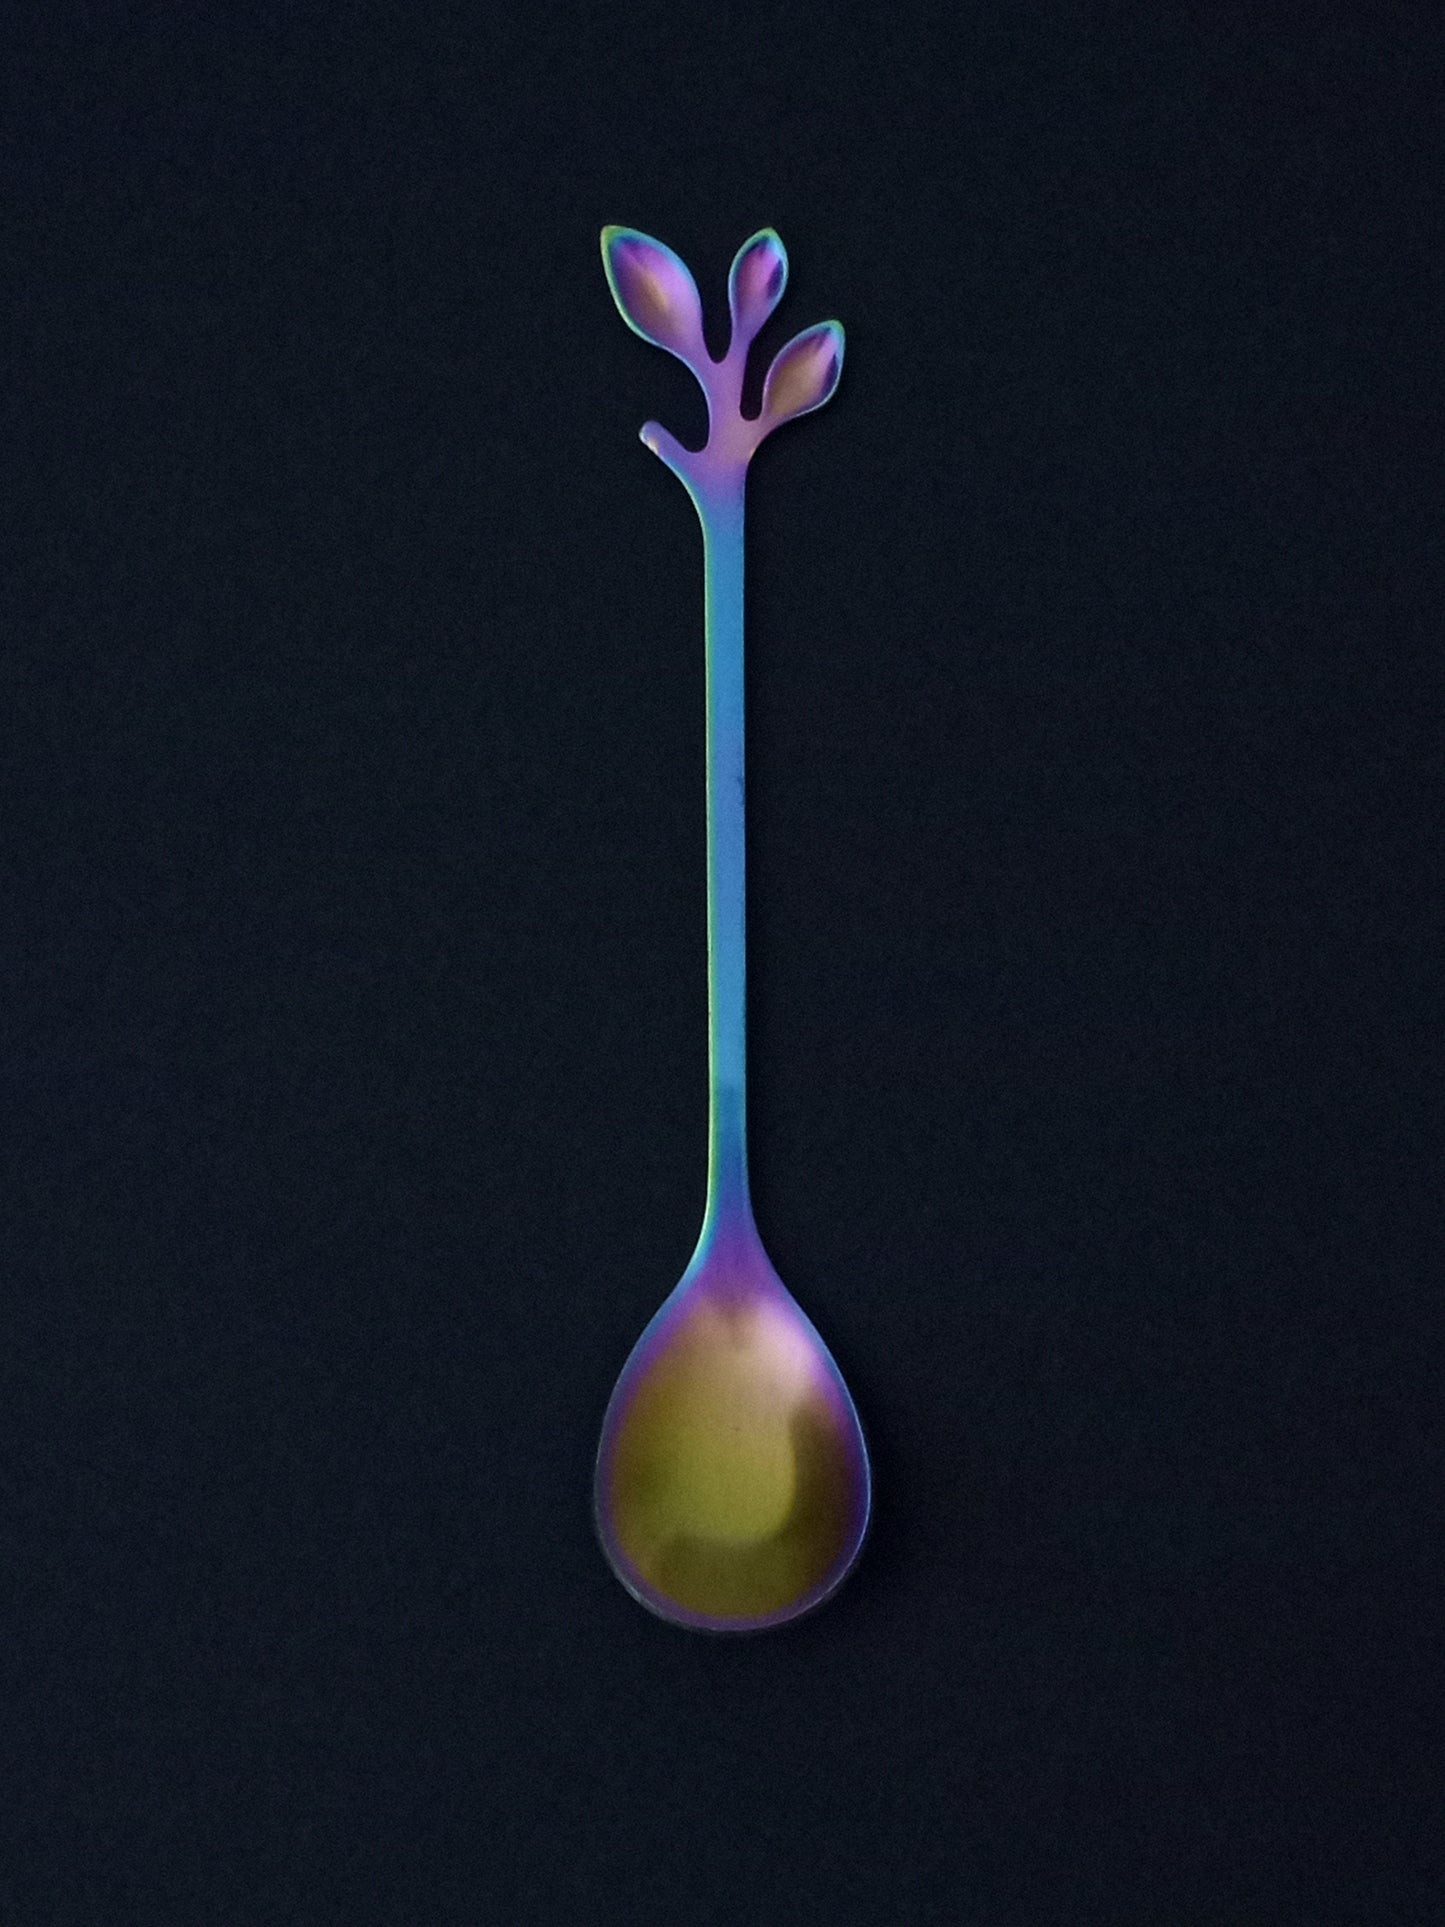 MULTI-COLORED STAINLESS STEEL SPOON